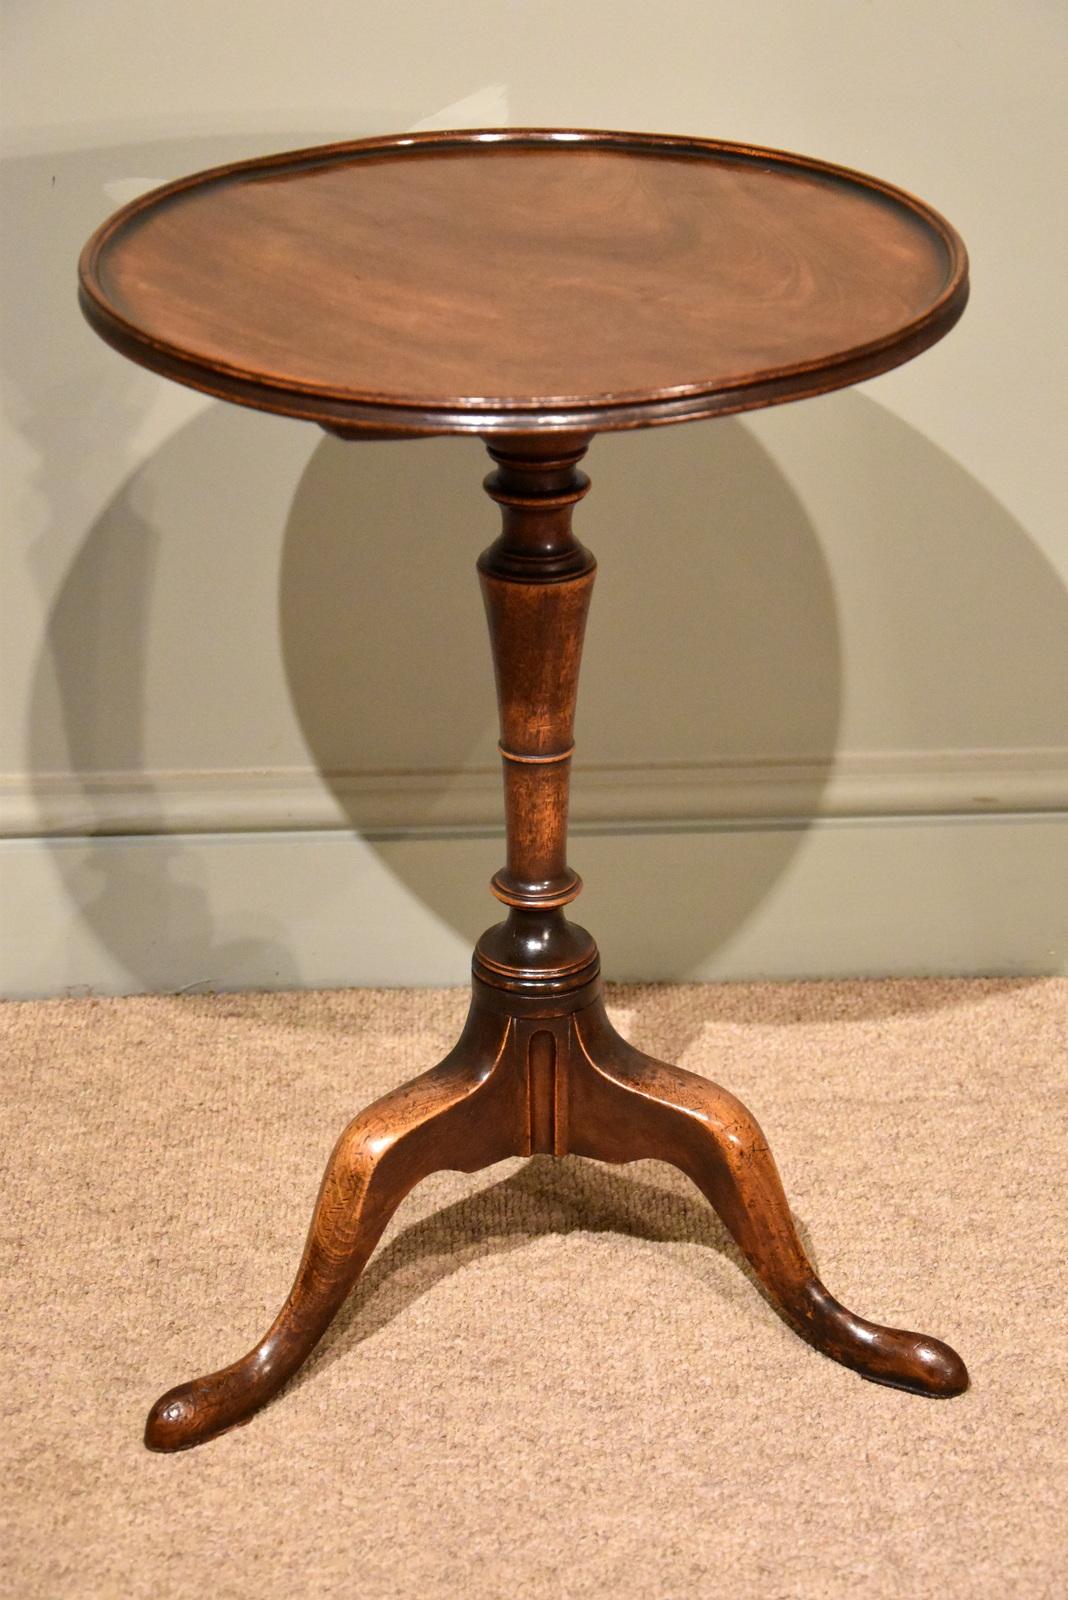 A very fine quality mid-18th century wine table with original catch. This fine and rare quality mahogany wine/kettle stand is unusual in having an original catch allowing the top of the tilt.

Dimensions:
Height 22